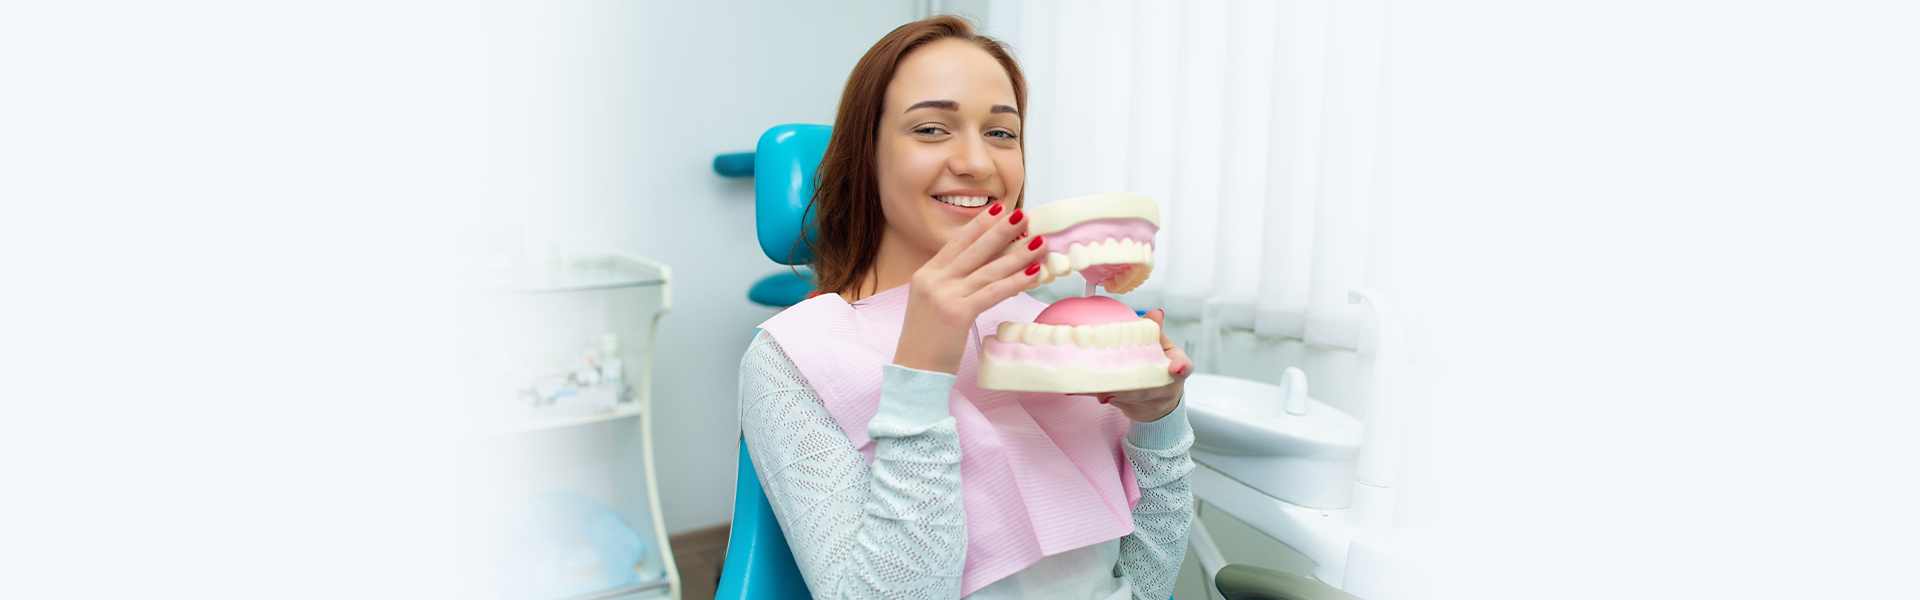 A Step-by-Step Guide to the Dental Exams and Cleaning Procedure